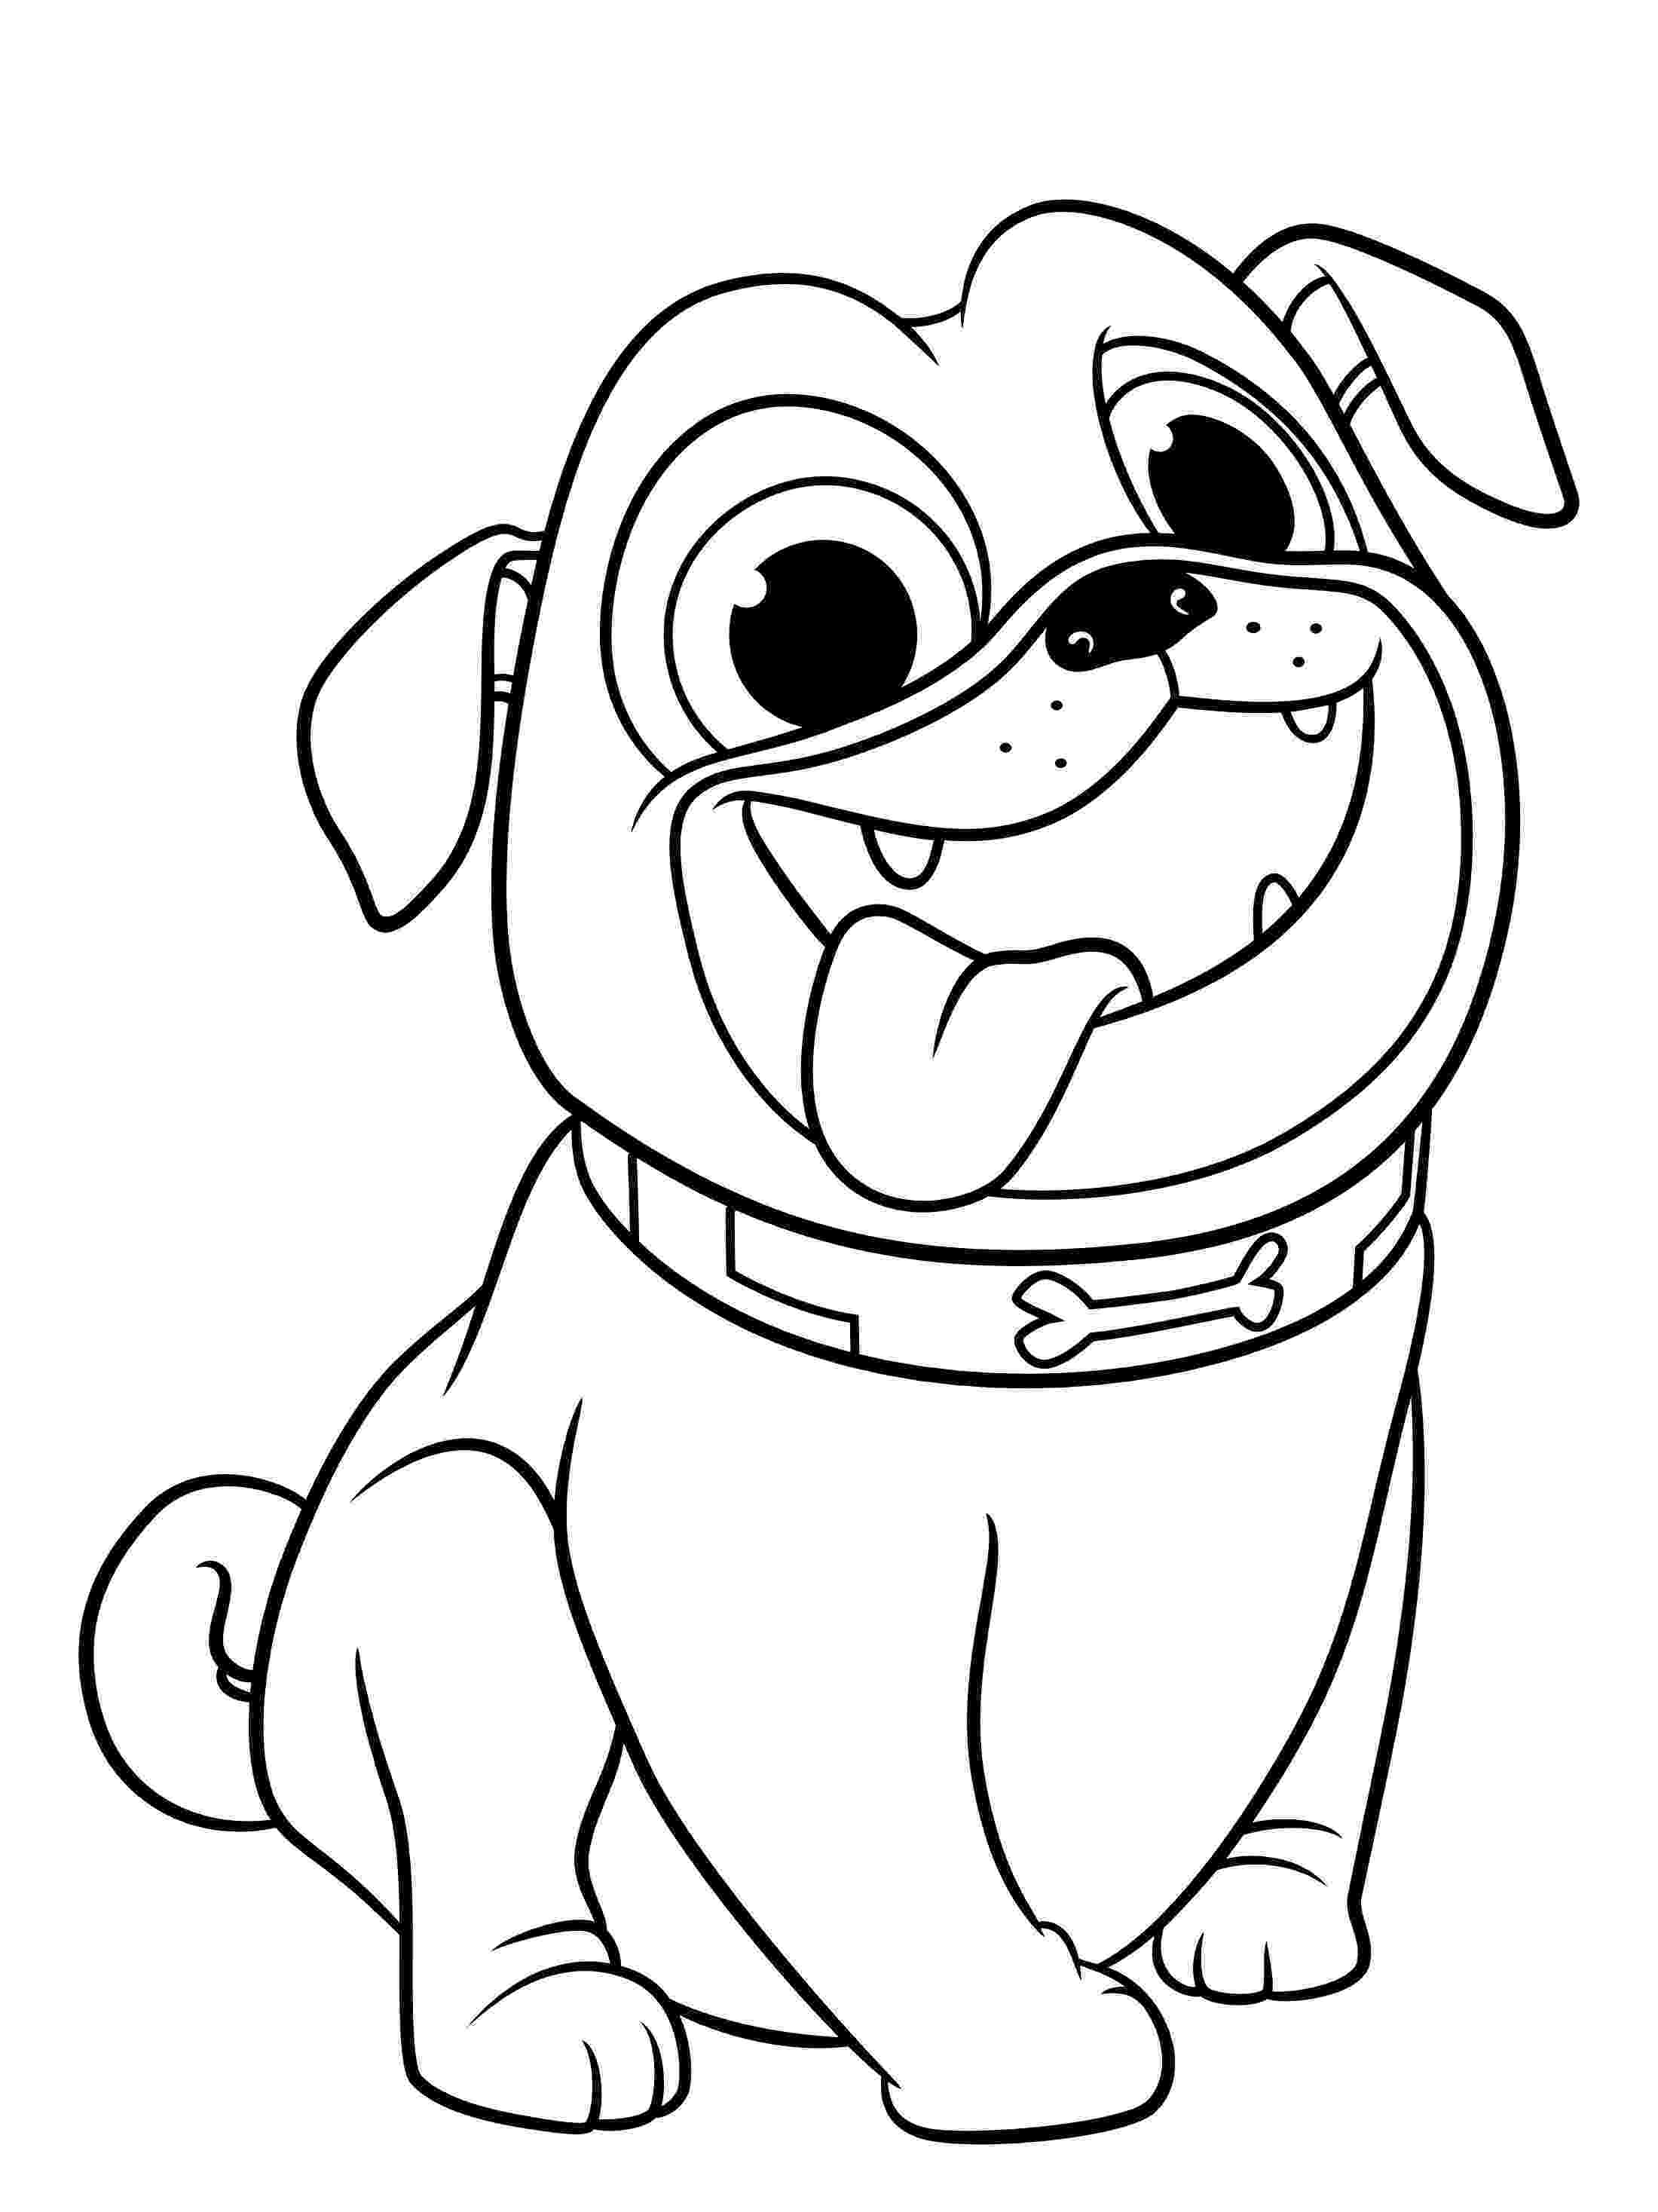 dogs coloring page free printable dog coloring pages for kids dogs coloring page 1 2